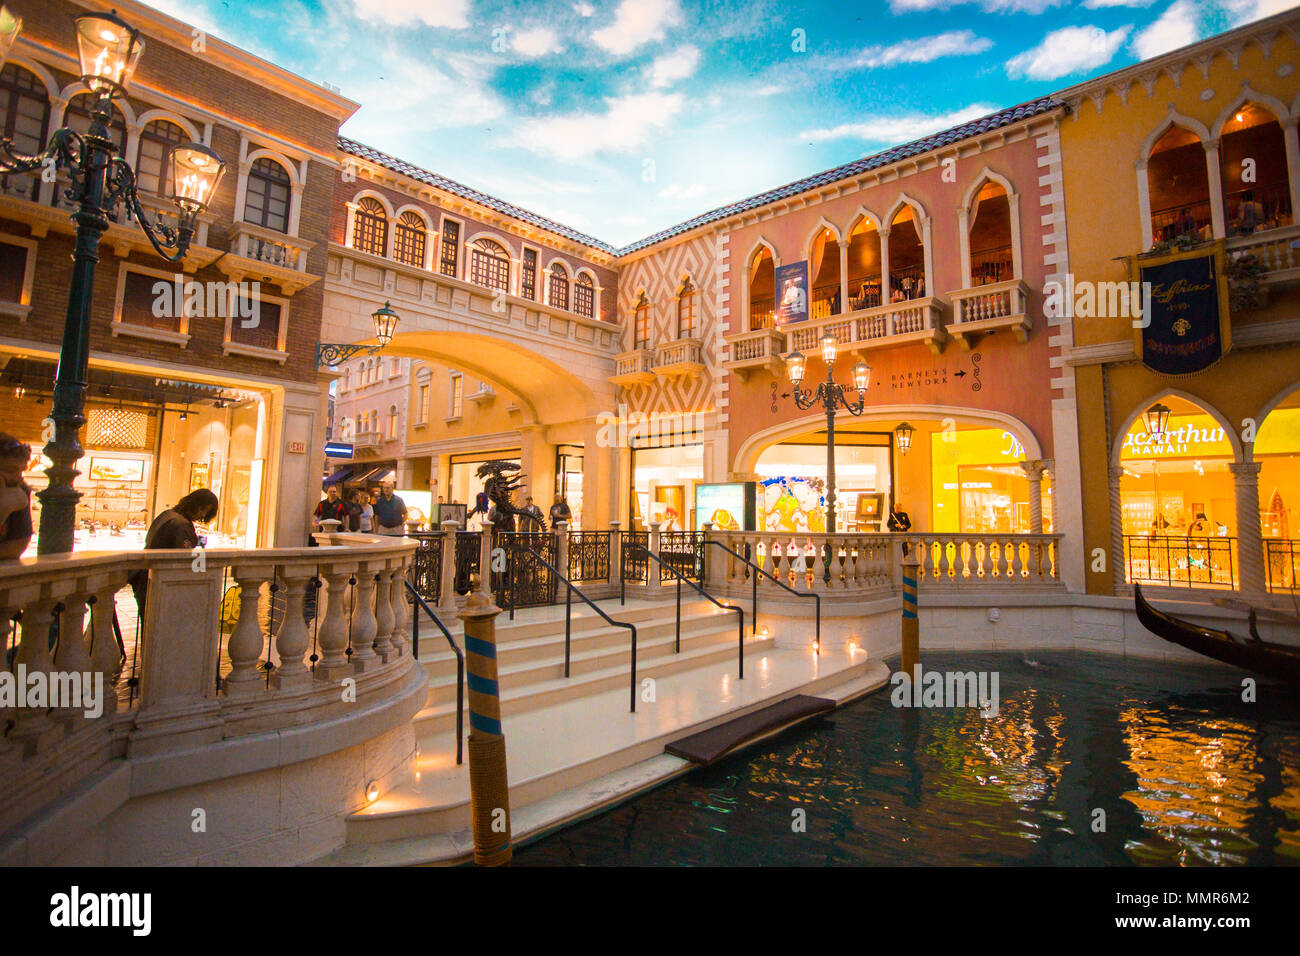 LAS VEGAS, NEVADA - MAY 18, 2017: Inside view of Grand Canal at the Venetian Hotel Casino Resort in beautiful Las Vegas with people and gondola in vie Stock Photo